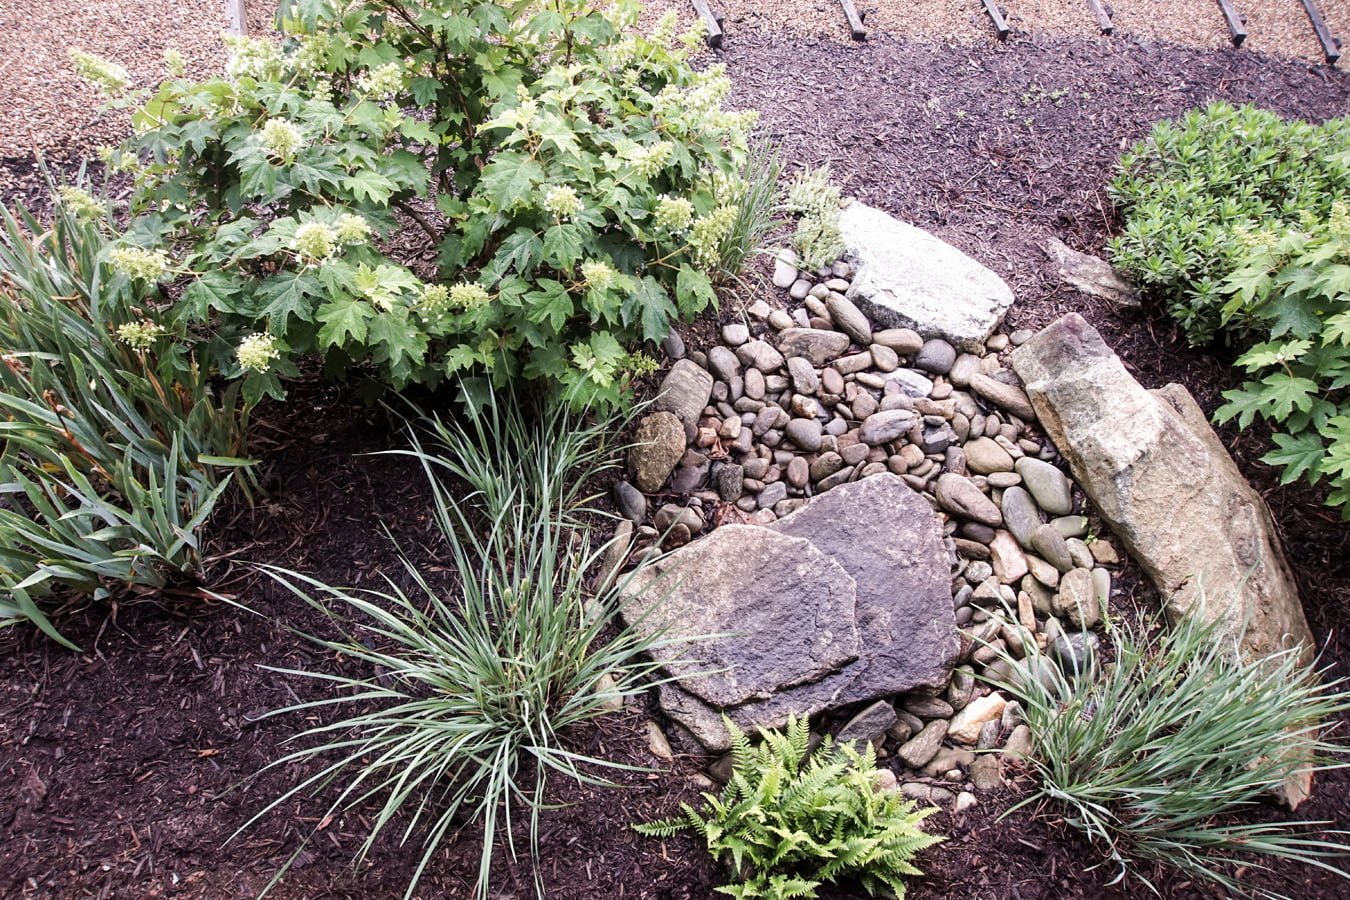 Implementation of a Bioretention Facility and Rain Garden Assessment Protocol